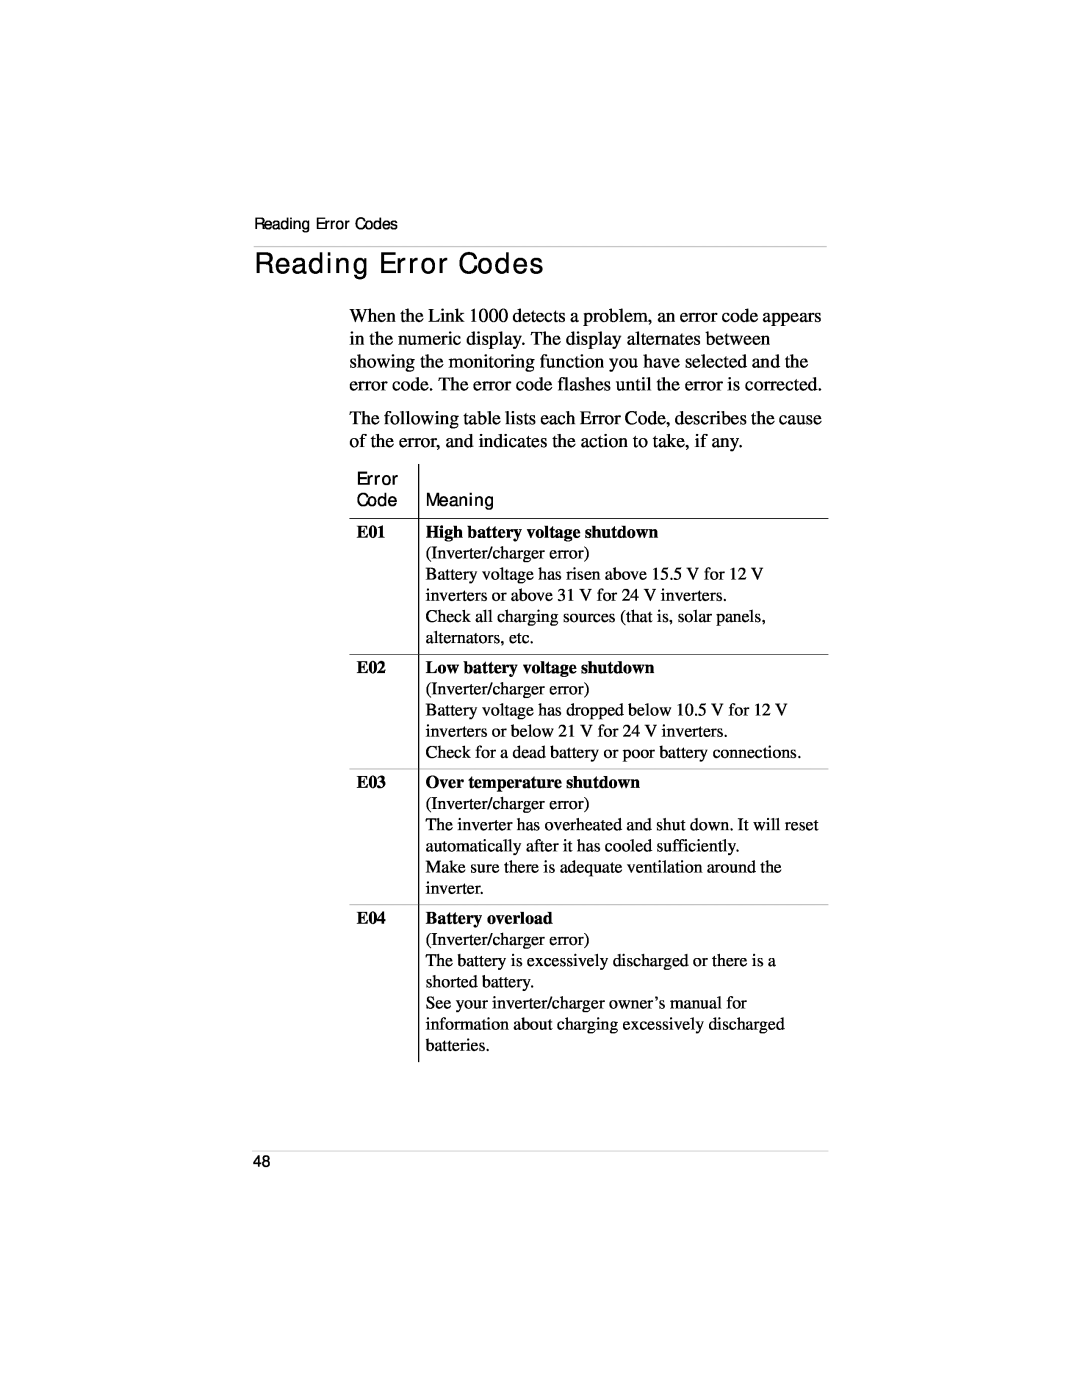 Xantrex Technology Link 1000 manual Reading Error Codes, Meaning 